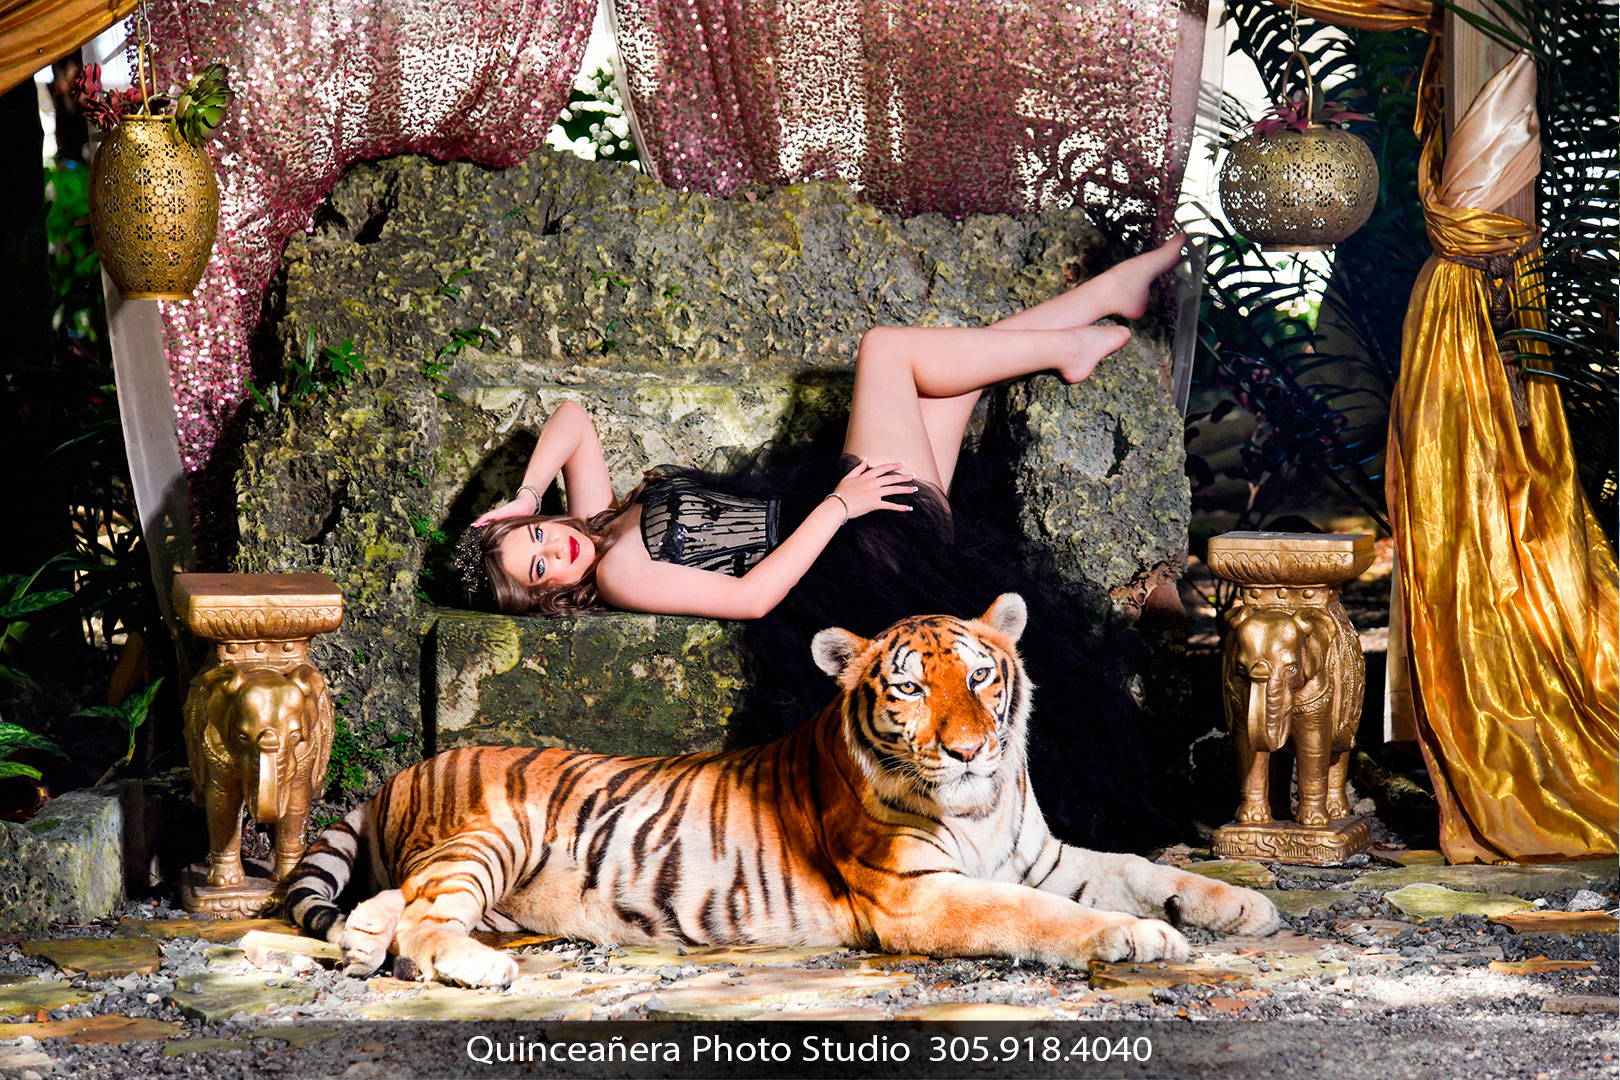 Capture the Essence of Quinceañera with an Artistic Pose and a Tiger